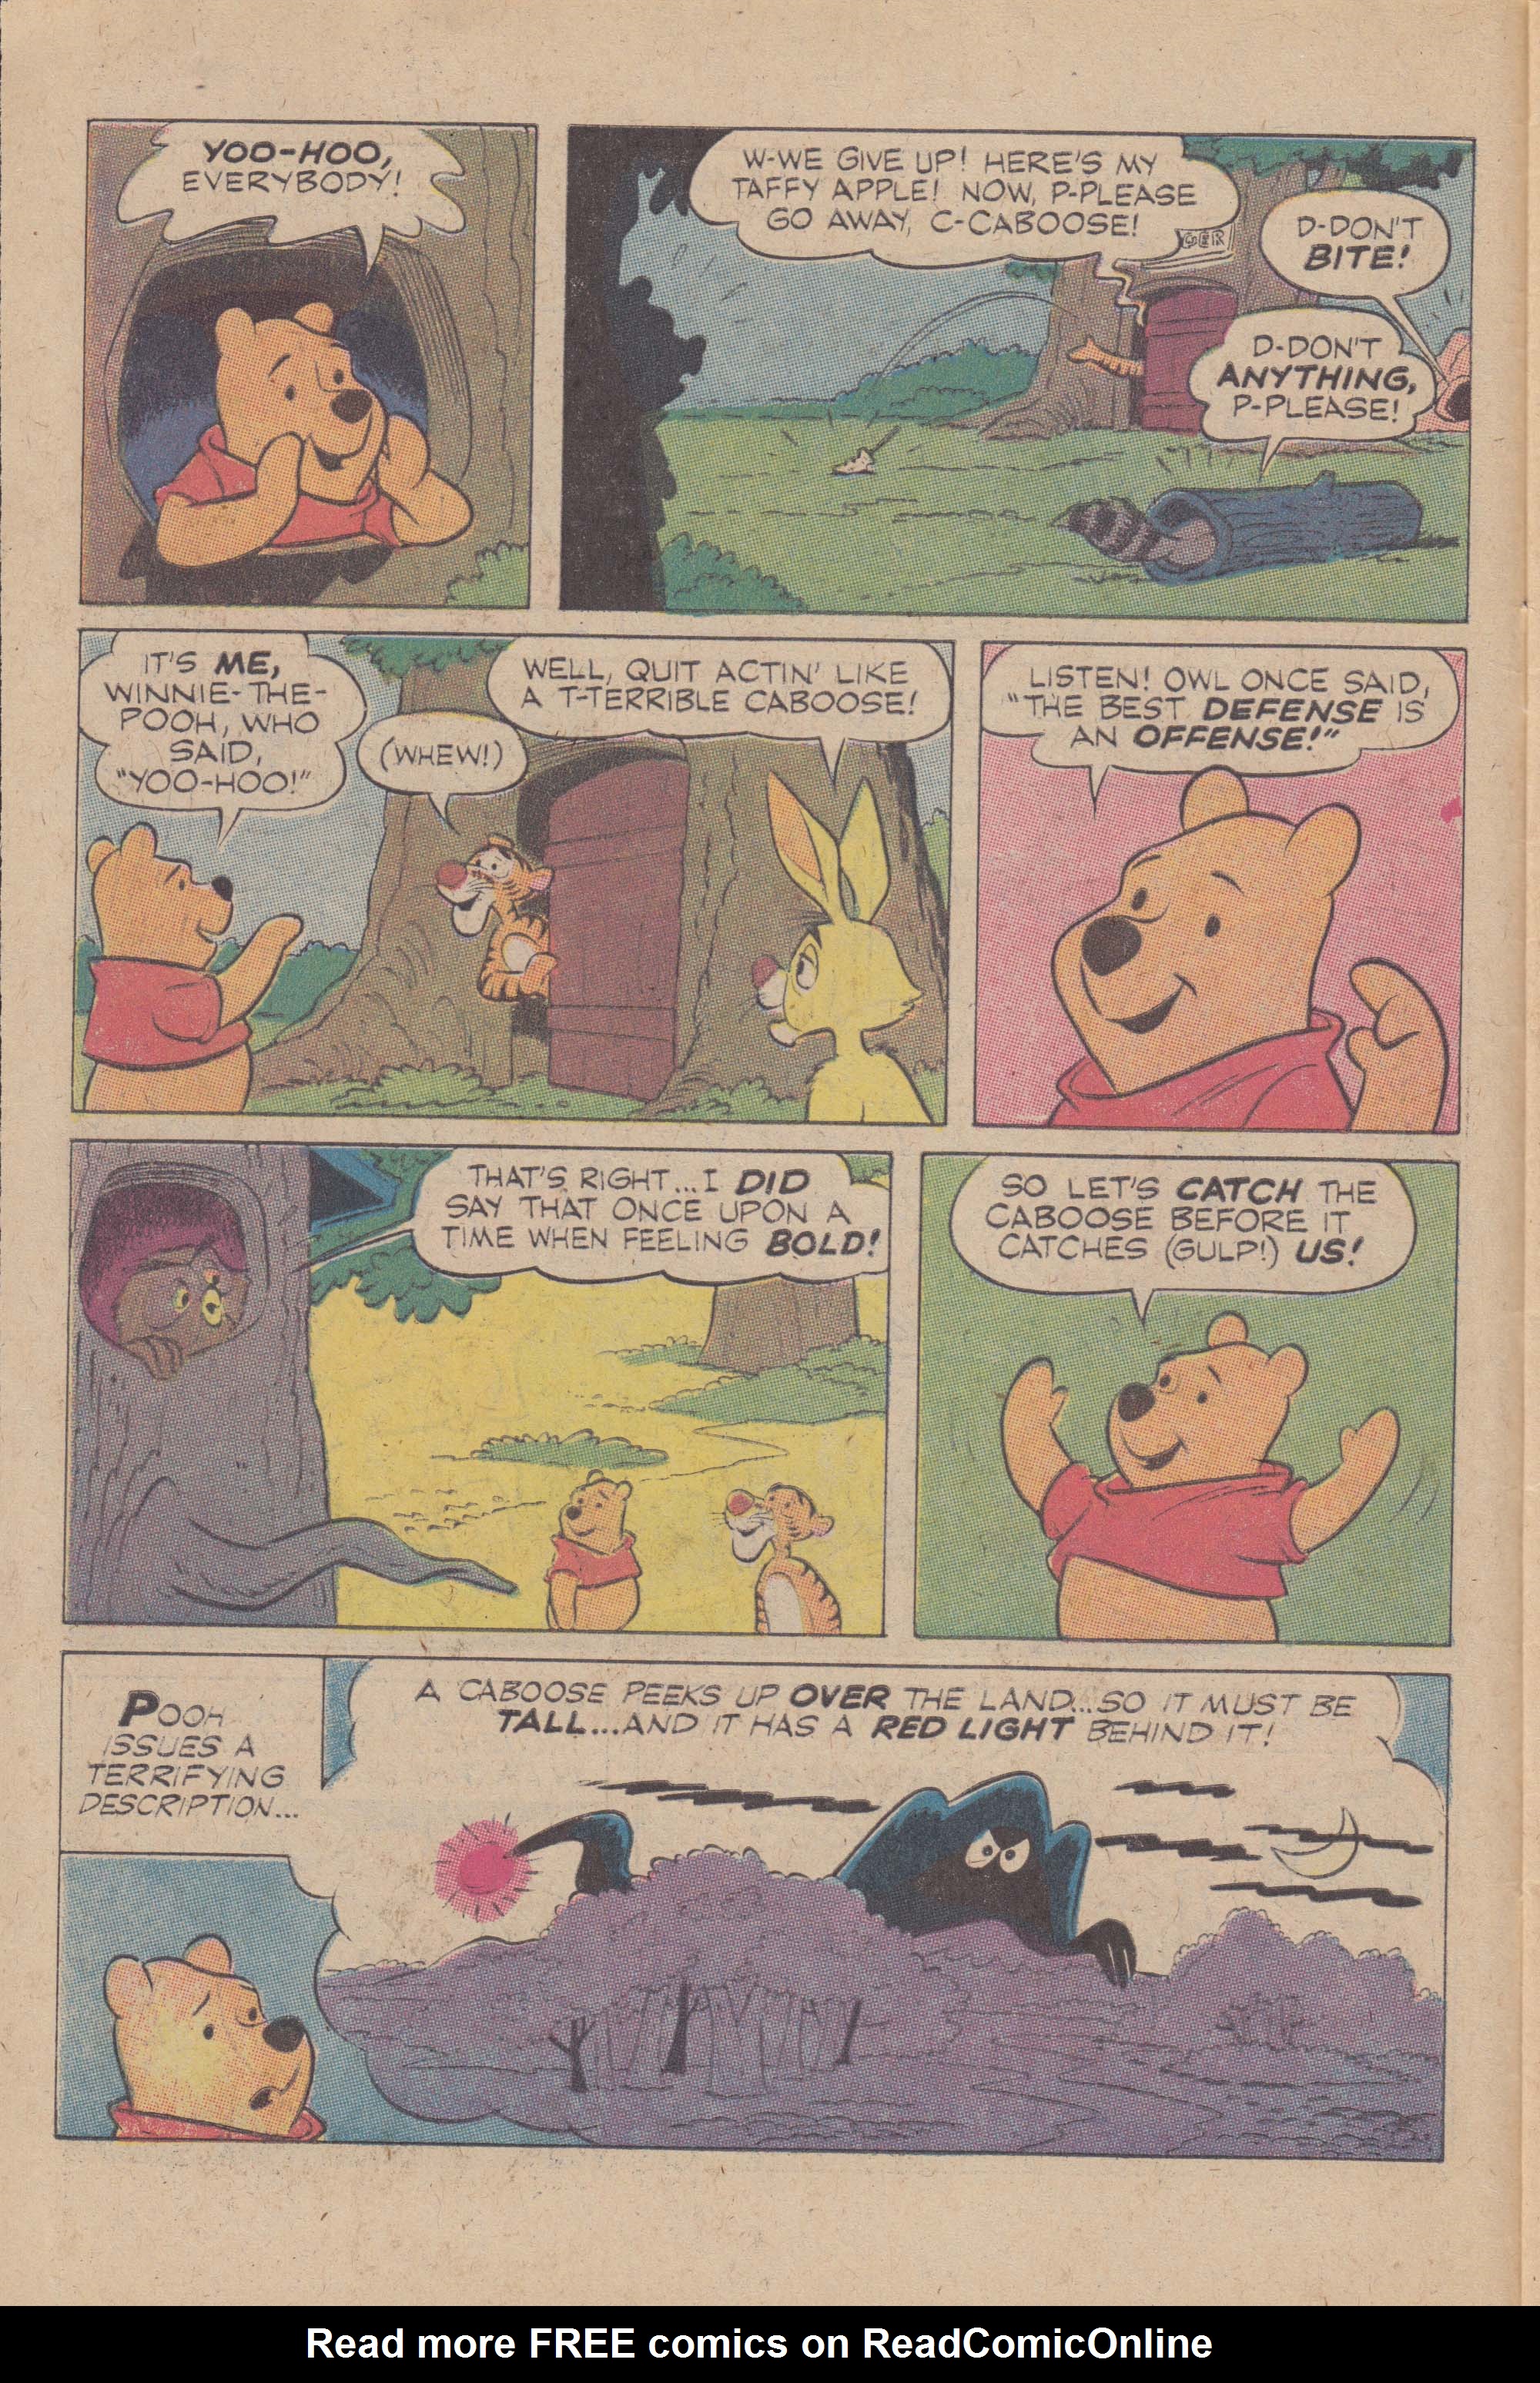 Read online Winnie-the-Pooh comic -  Issue #30 - 6